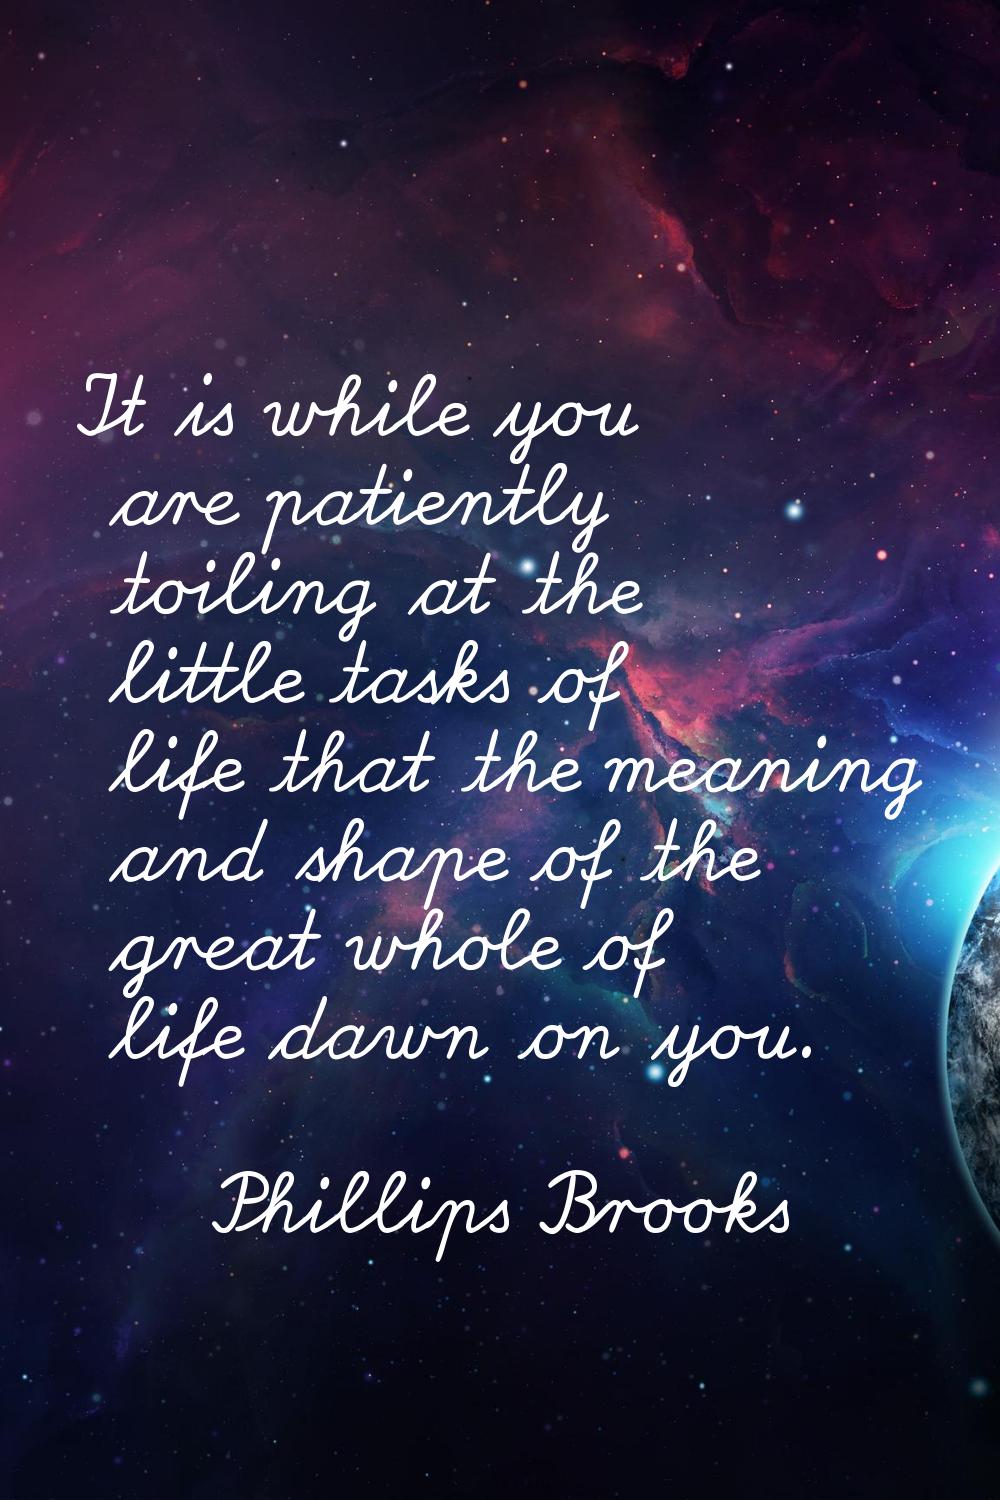 It is while you are patiently toiling at the little tasks of life that the meaning and shape of the